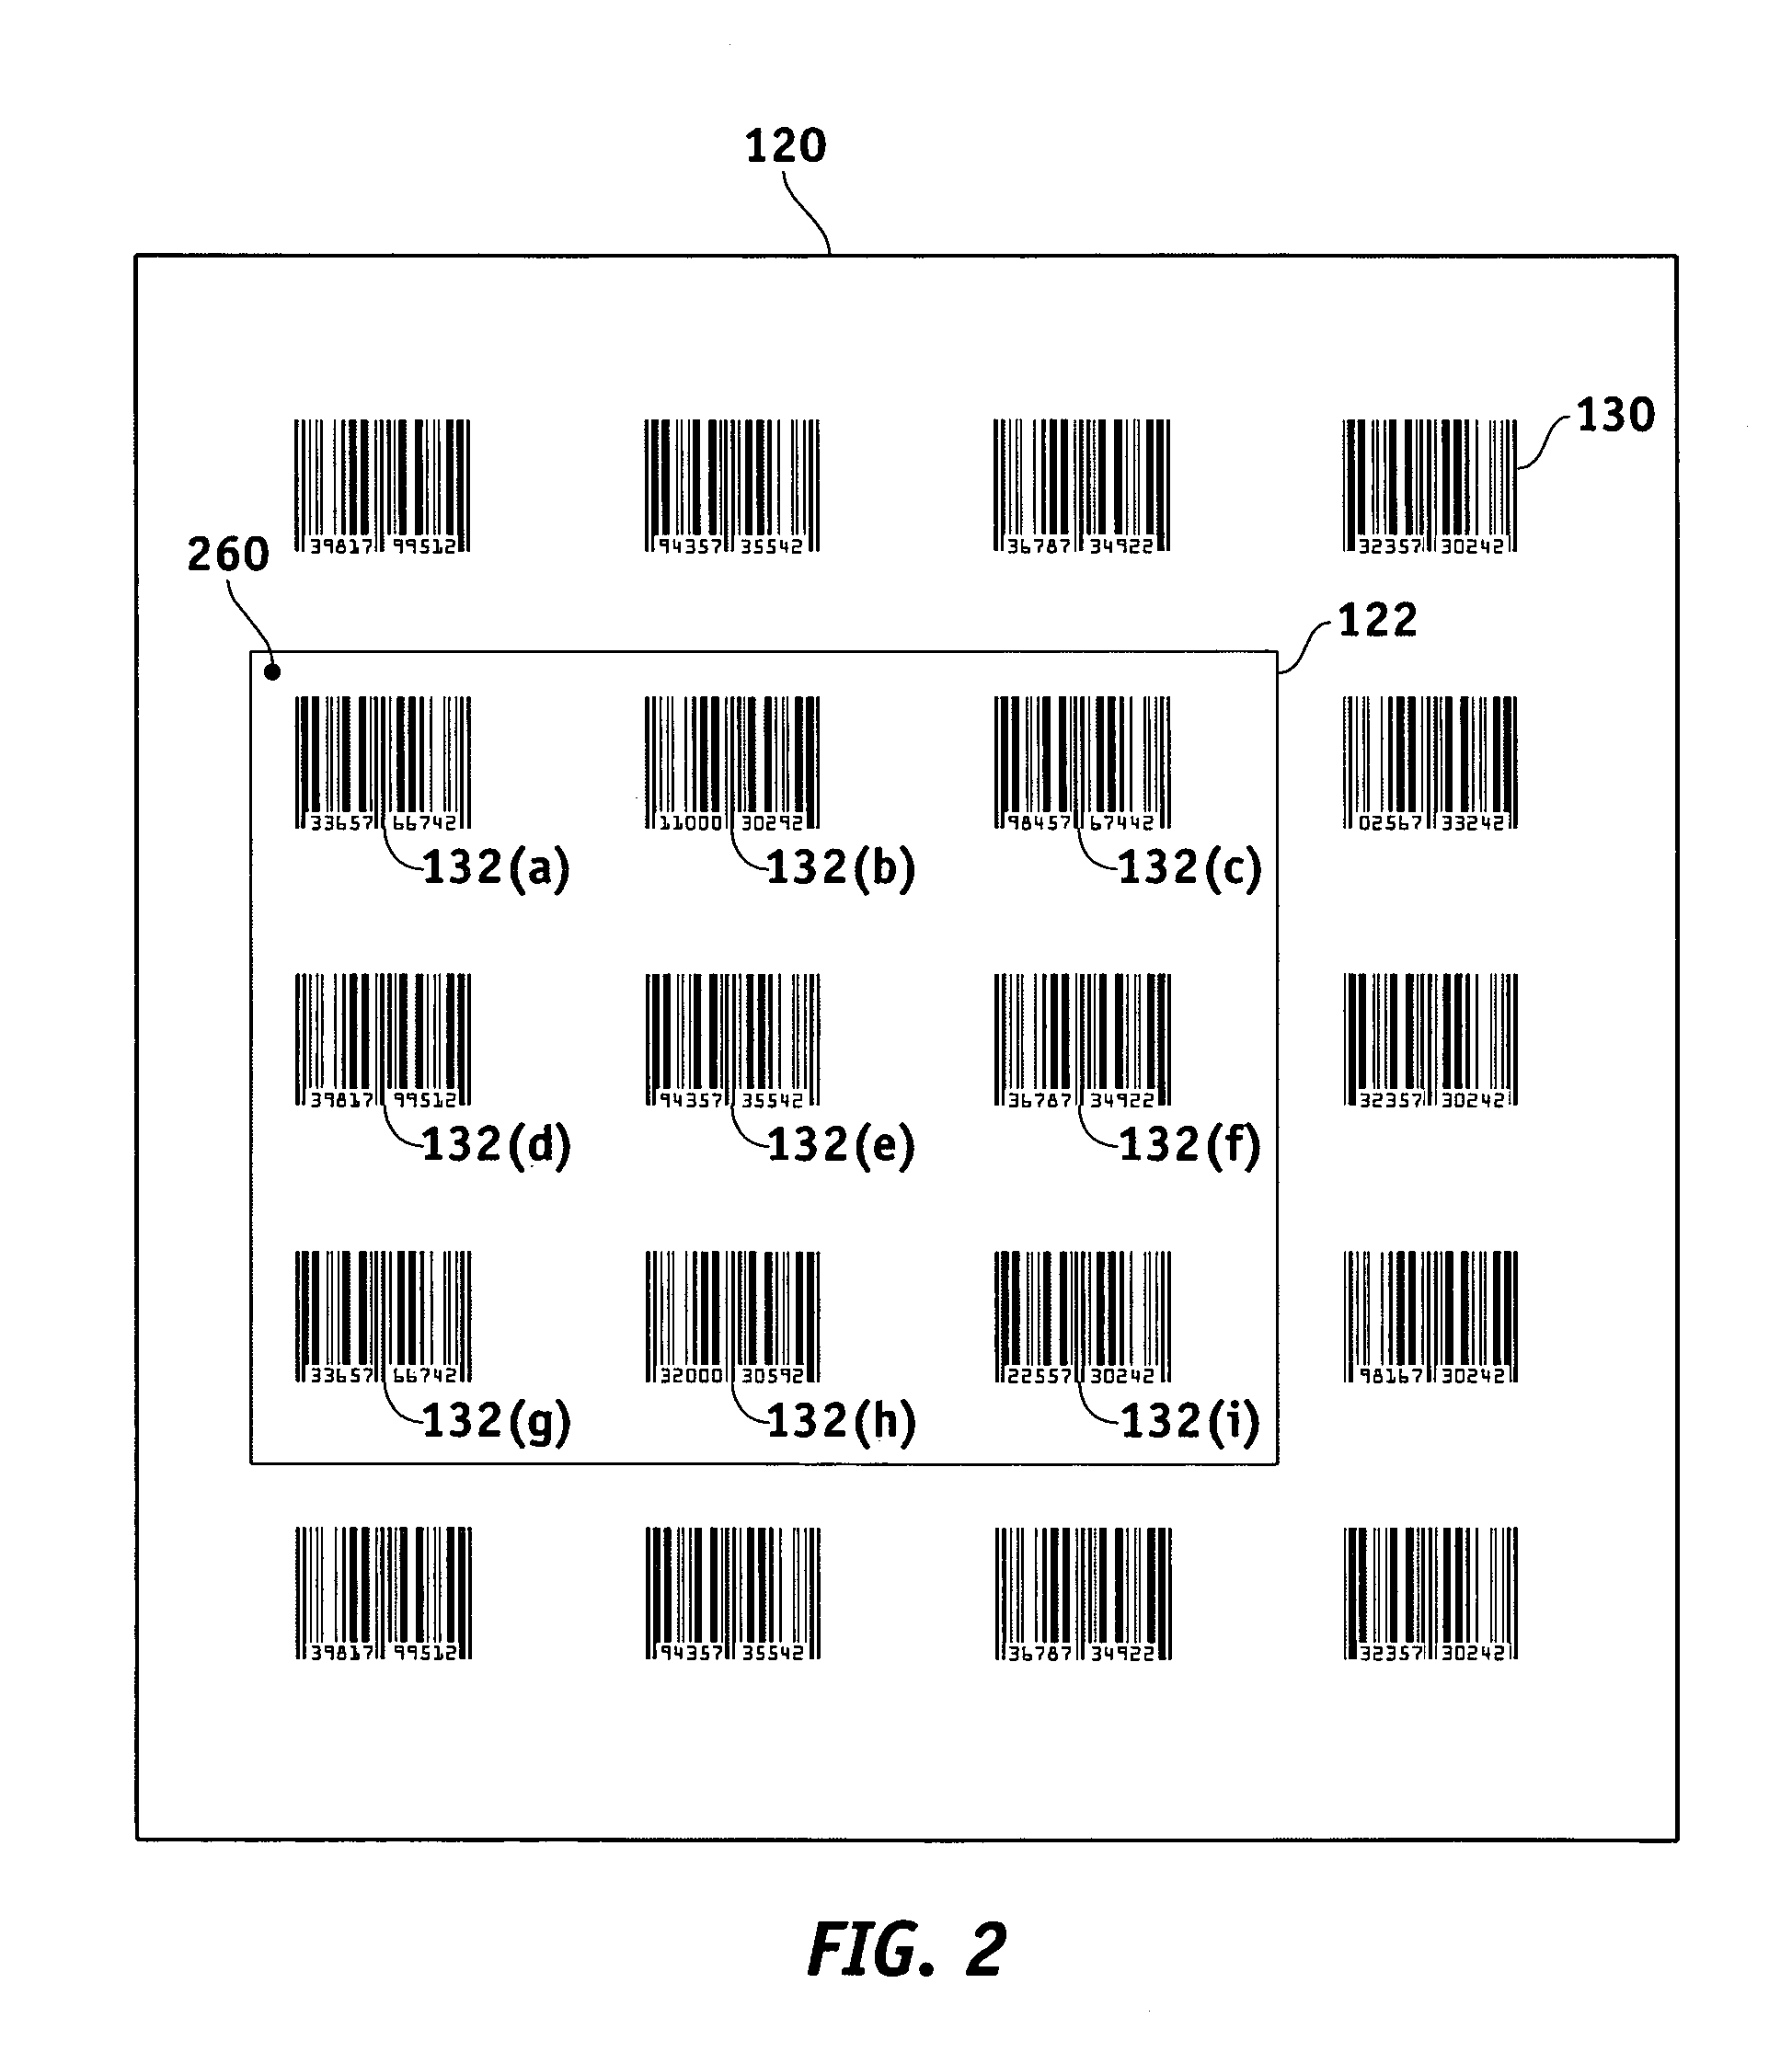 Methods and apparatus for identifying candidate barcode fields